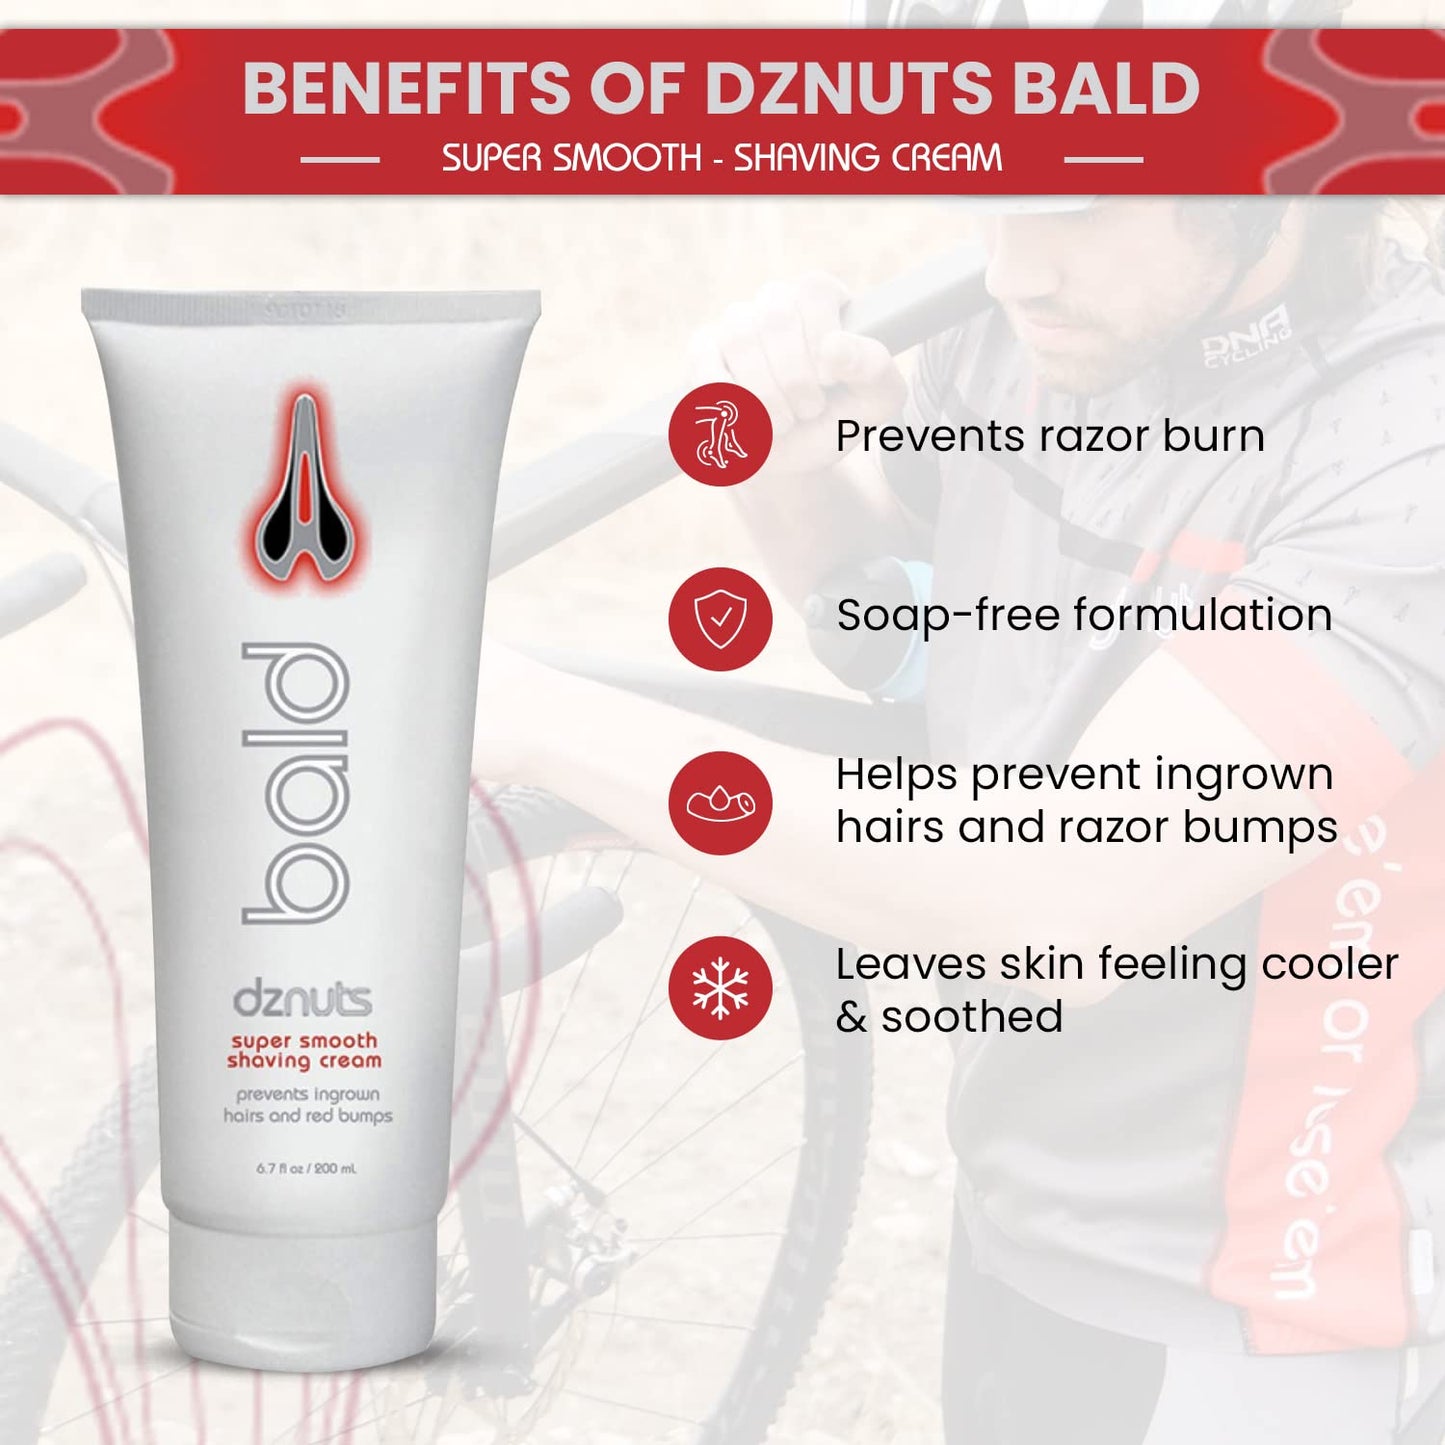 dznuts Bald Super Smooth Shaving Cream, Helps Prevent Razor Burns, Ingrown Hairs and Cuts for Cooled, Soothed, and Moisturized Skin, 6.7 fl. Oz, 200ml, 3 Pack